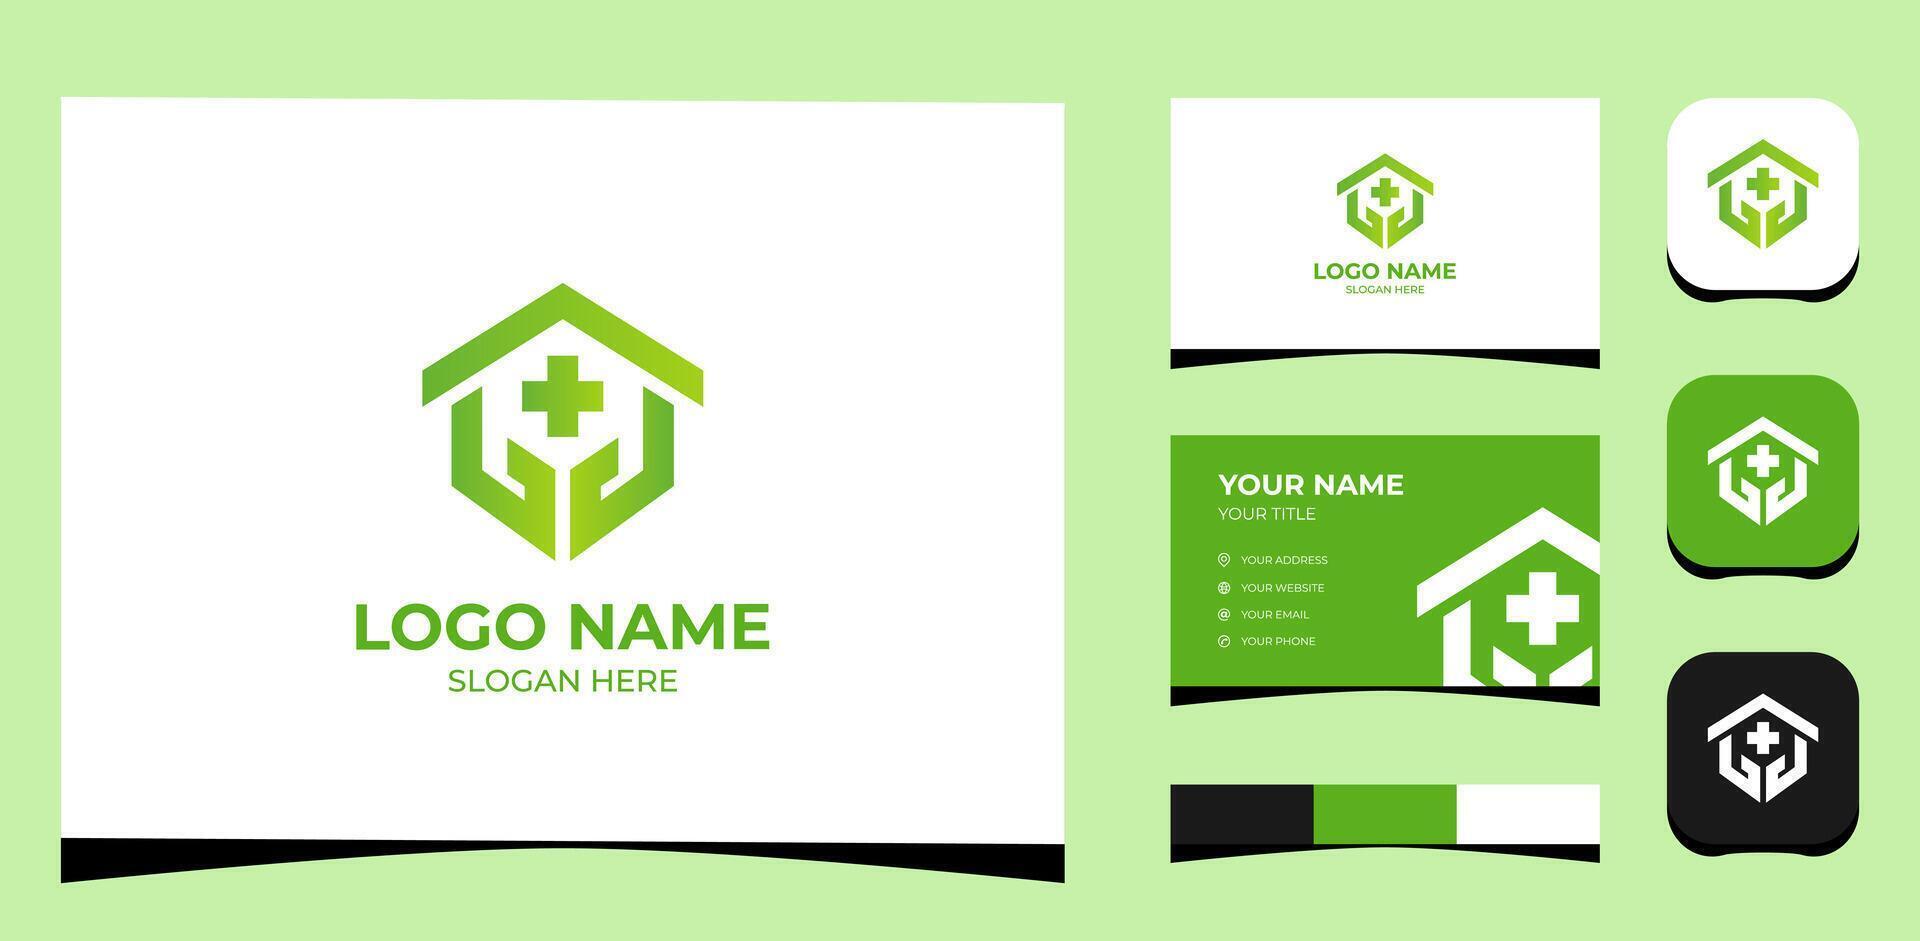 Template Logo Creative Home and Health Care, Green concept. Creative Template with color pallet, visual branding, business card and icon. vector